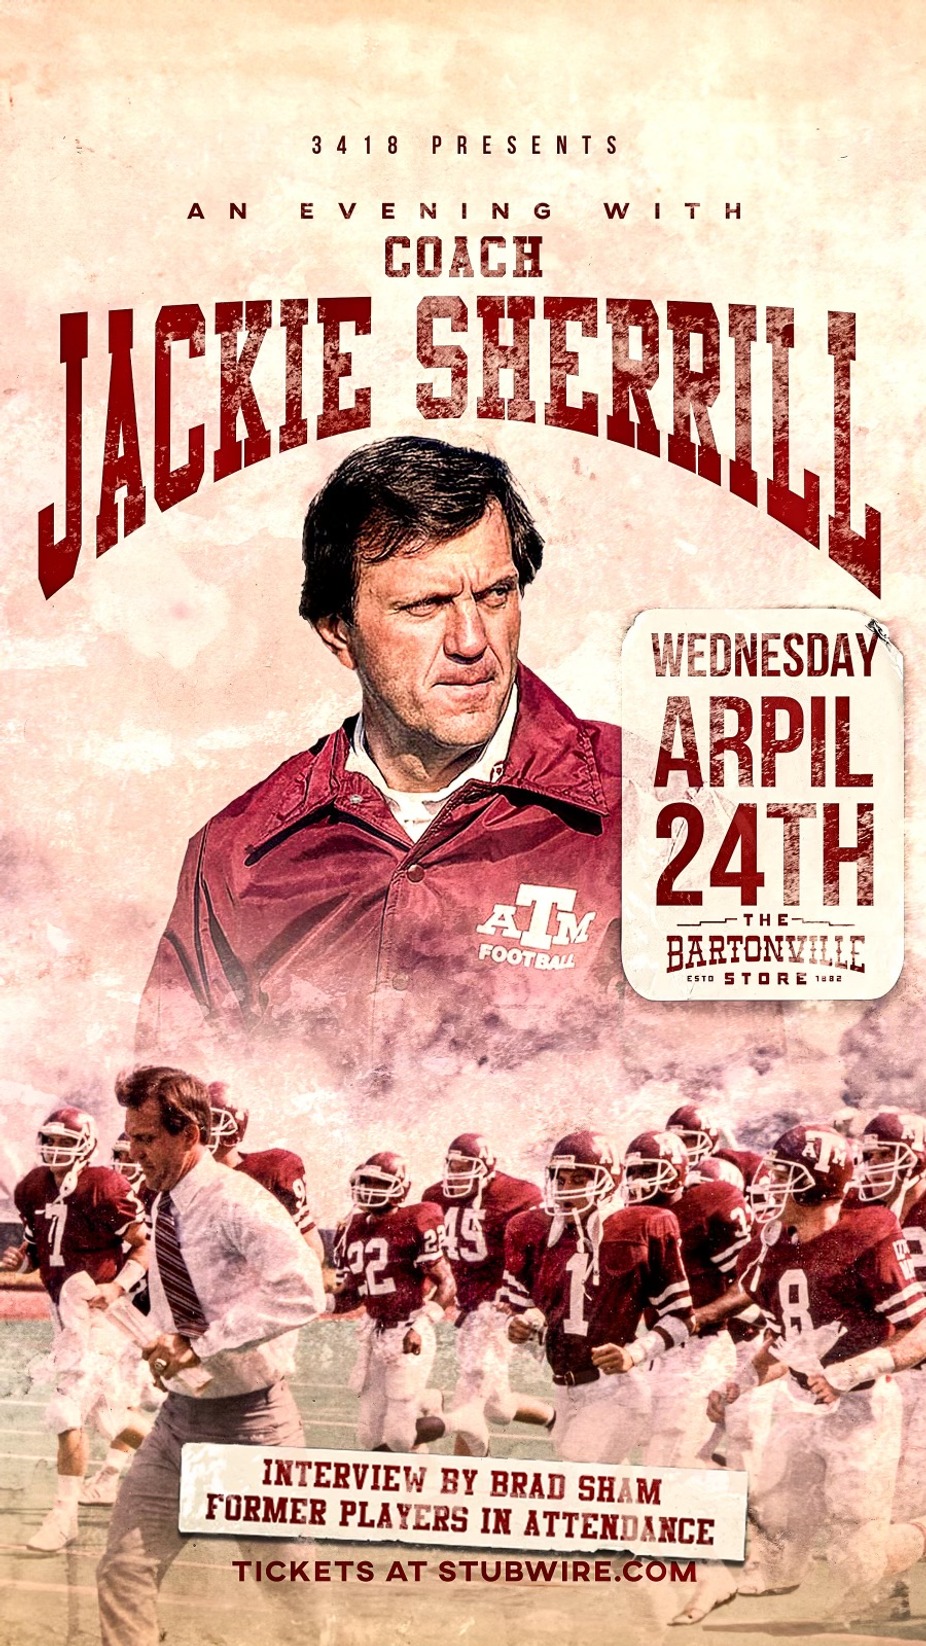 An evening of Football stories & Q&A with Coach Jackie Sherrill event photo